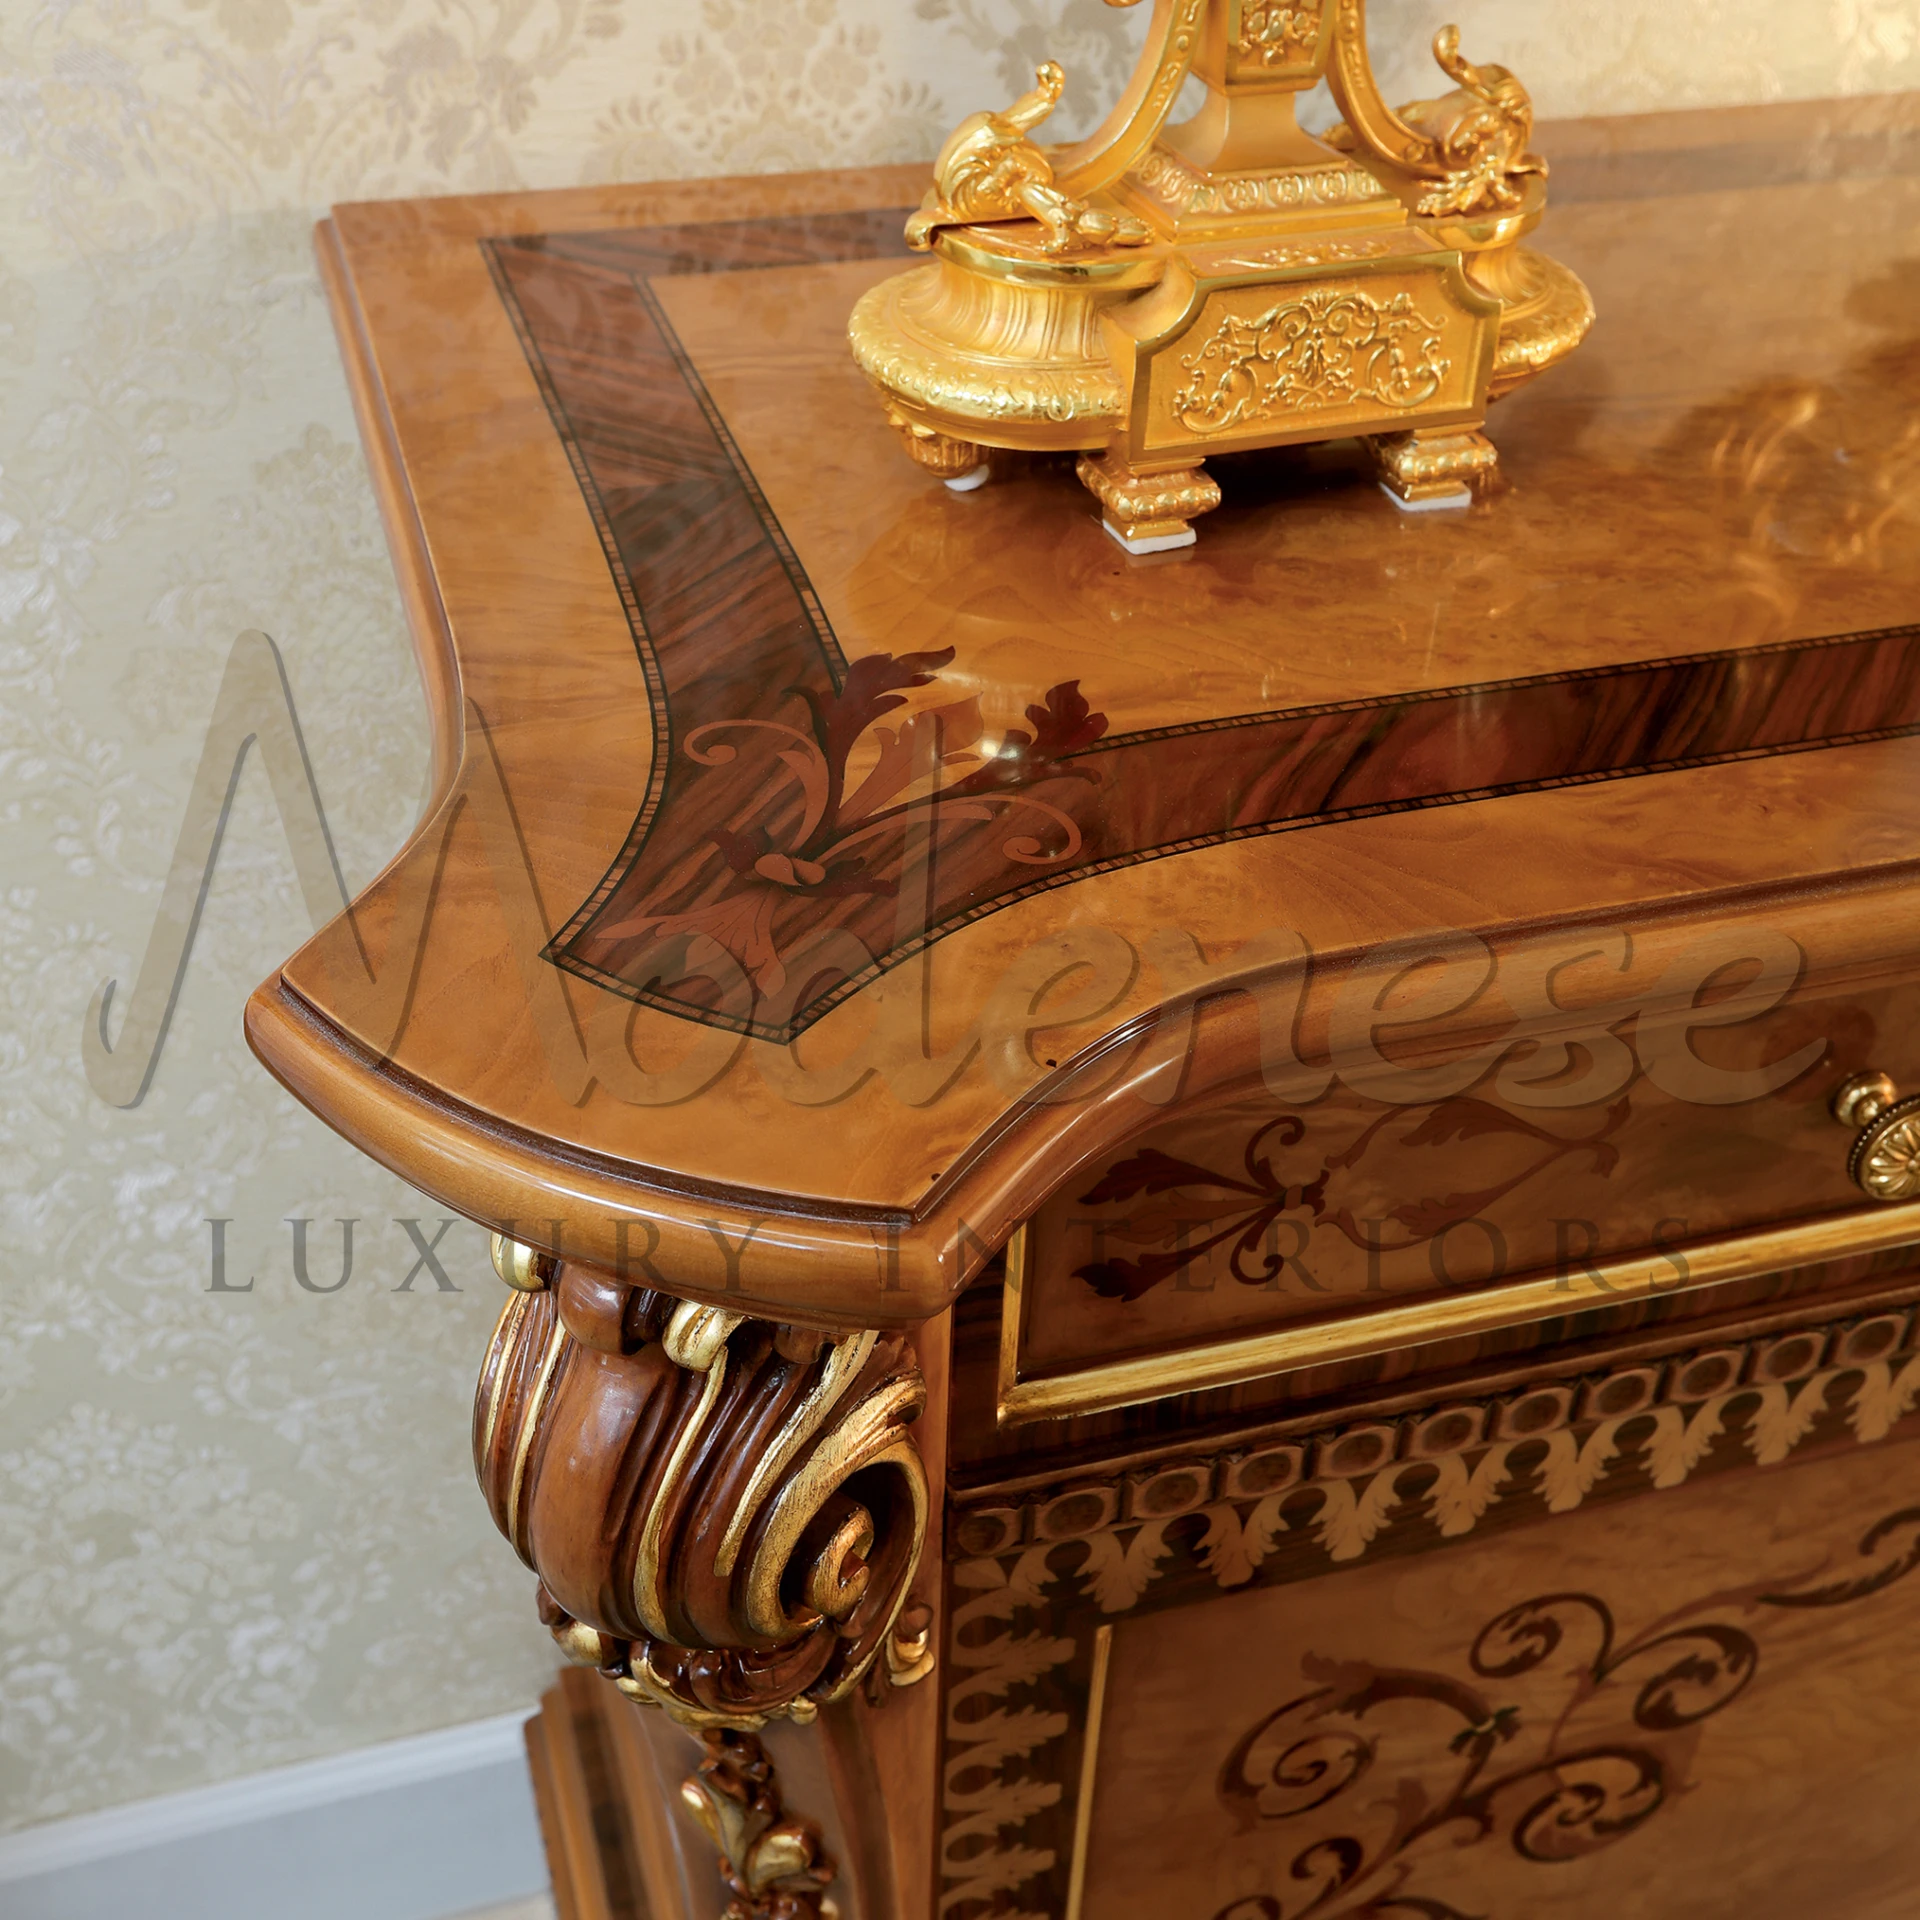 Close-up of a baroque style wooden sideboard with intricate inlays and gilded details.